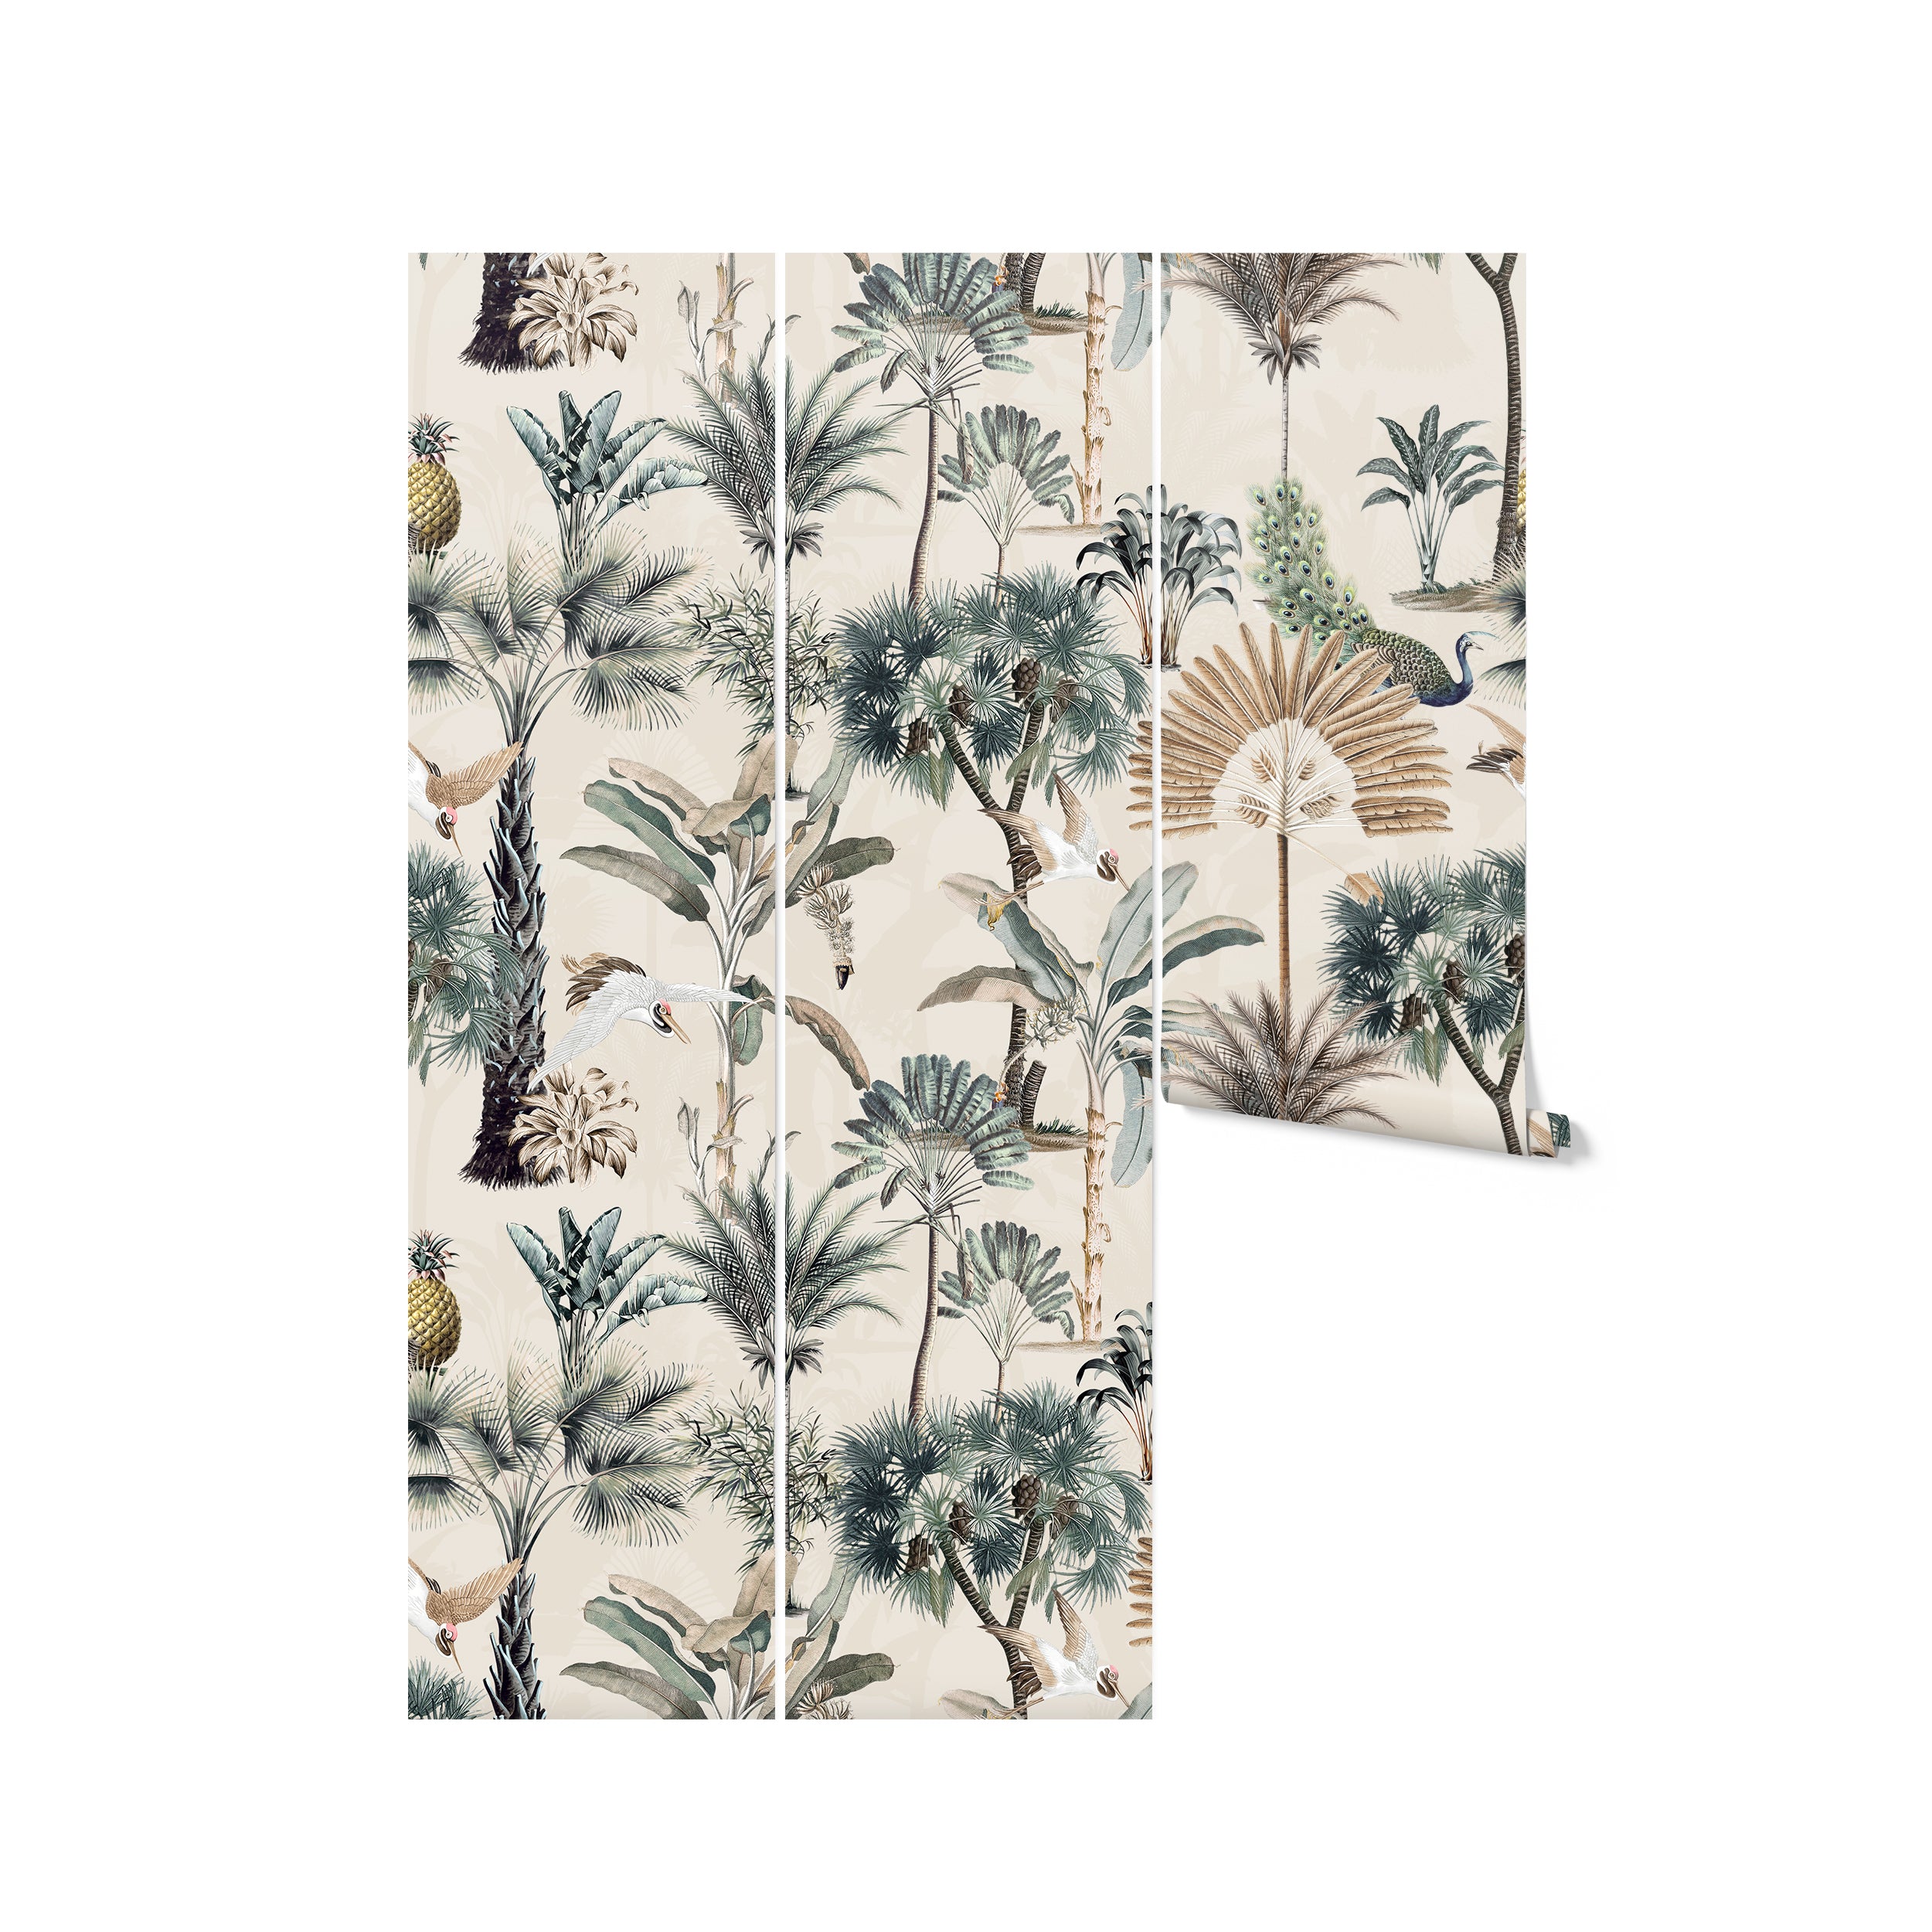 Vertical image showing a panel of Exotic Ecru Wallpaper, with its elaborate tropical theme including palms, peacocks, and other exotic plants. The detailed artwork and subtle colors make it a statement piece for any room